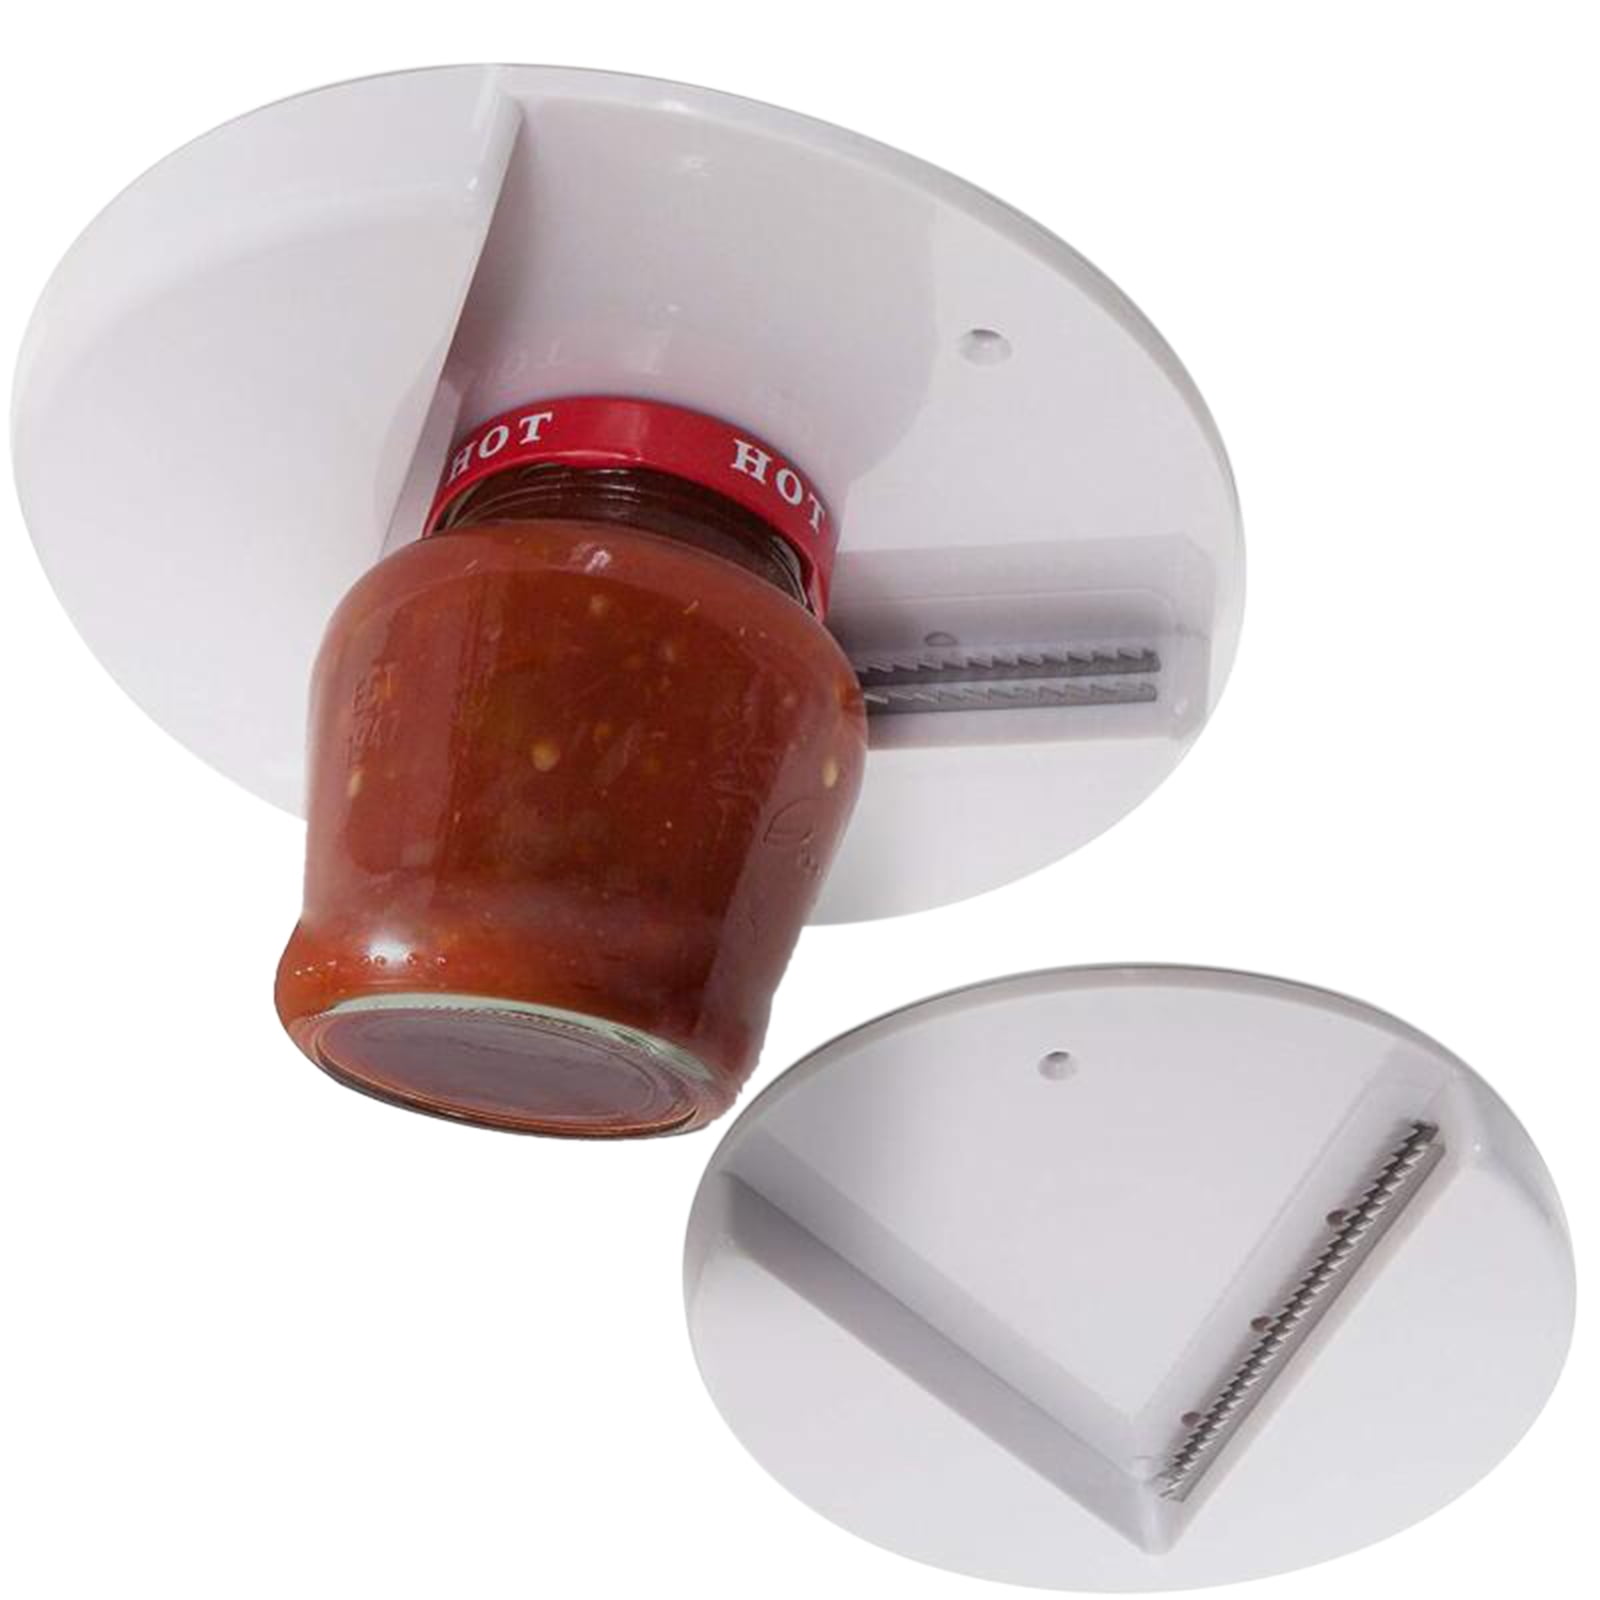 One opening The Grip Jar Opener Under Cabinet Any Size Type